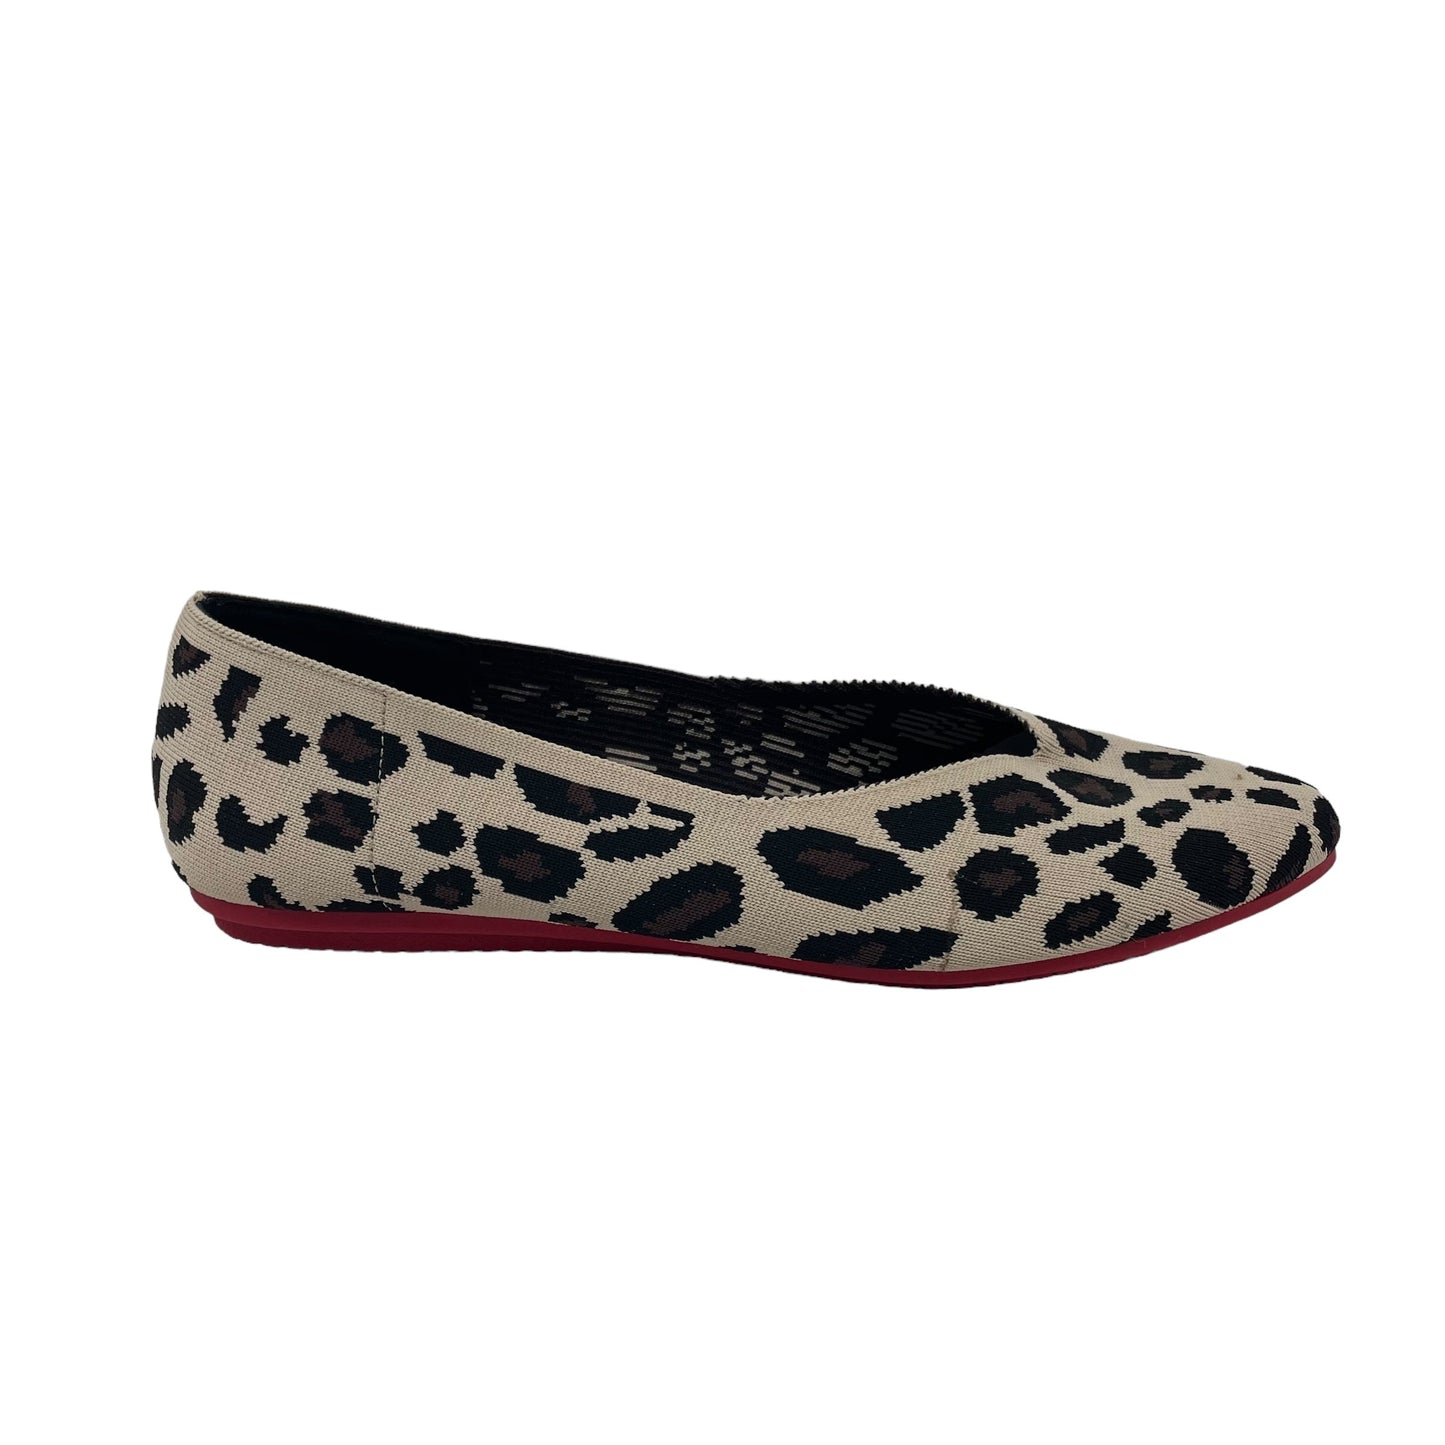 ANIMAL PRINT SHOES FLATS by KELLY AND KATIE Size:7.5